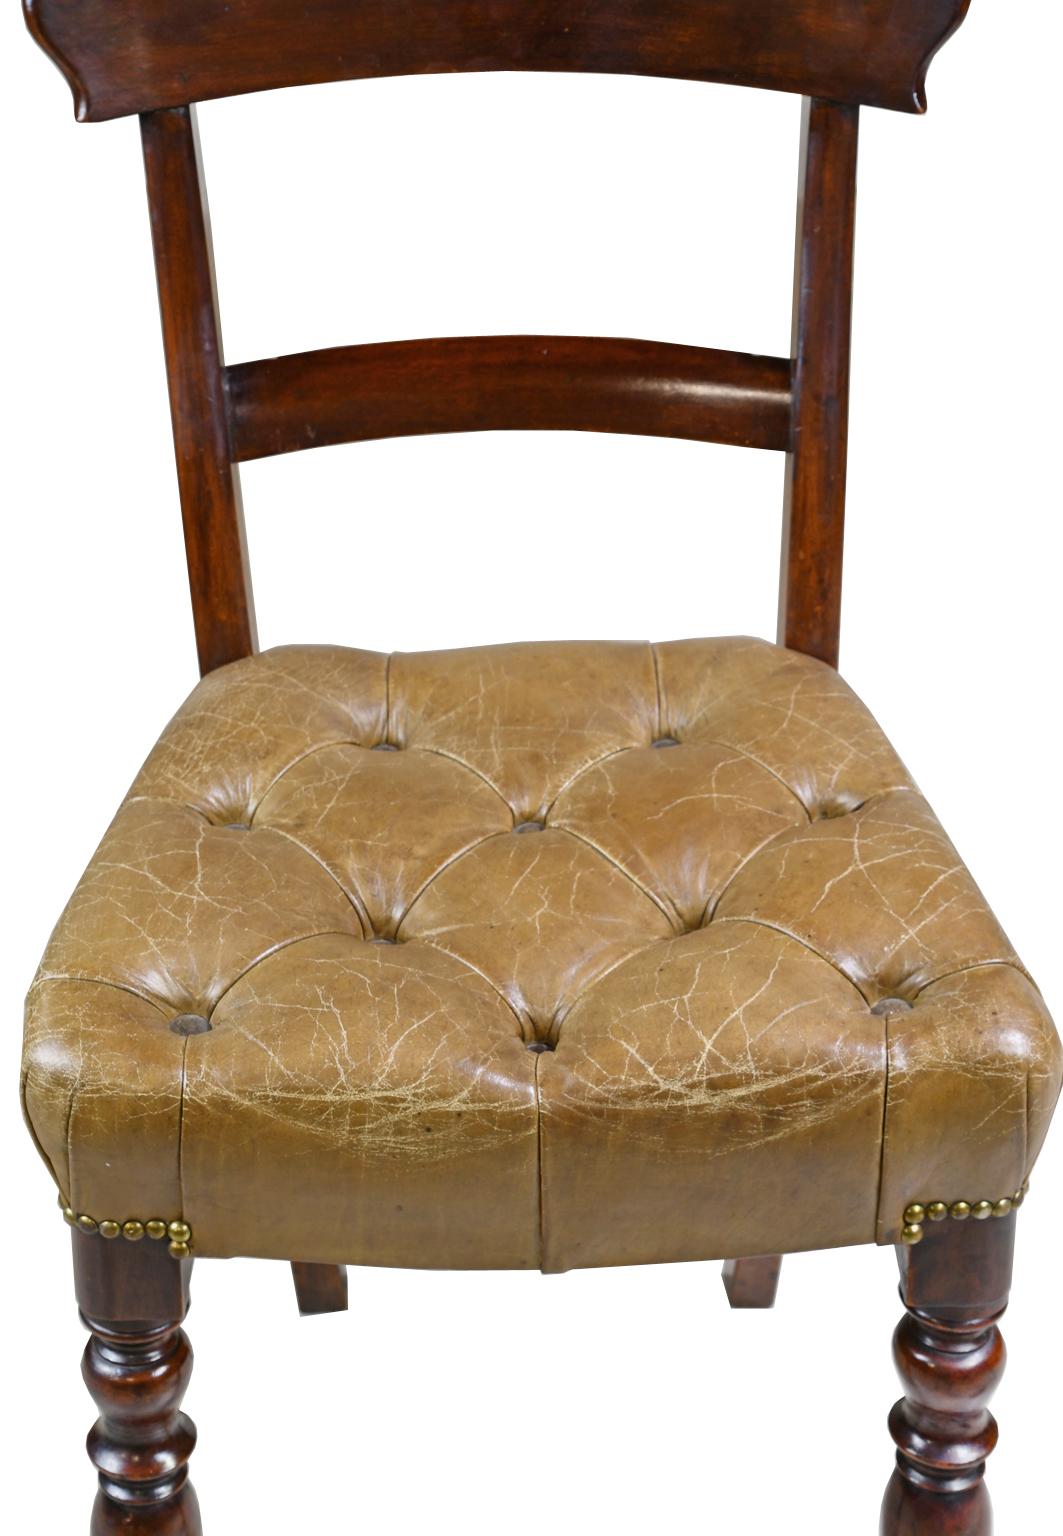 Early Victorian Mahogany Chair with Tufted Leather Upholstery, England For Sale 3